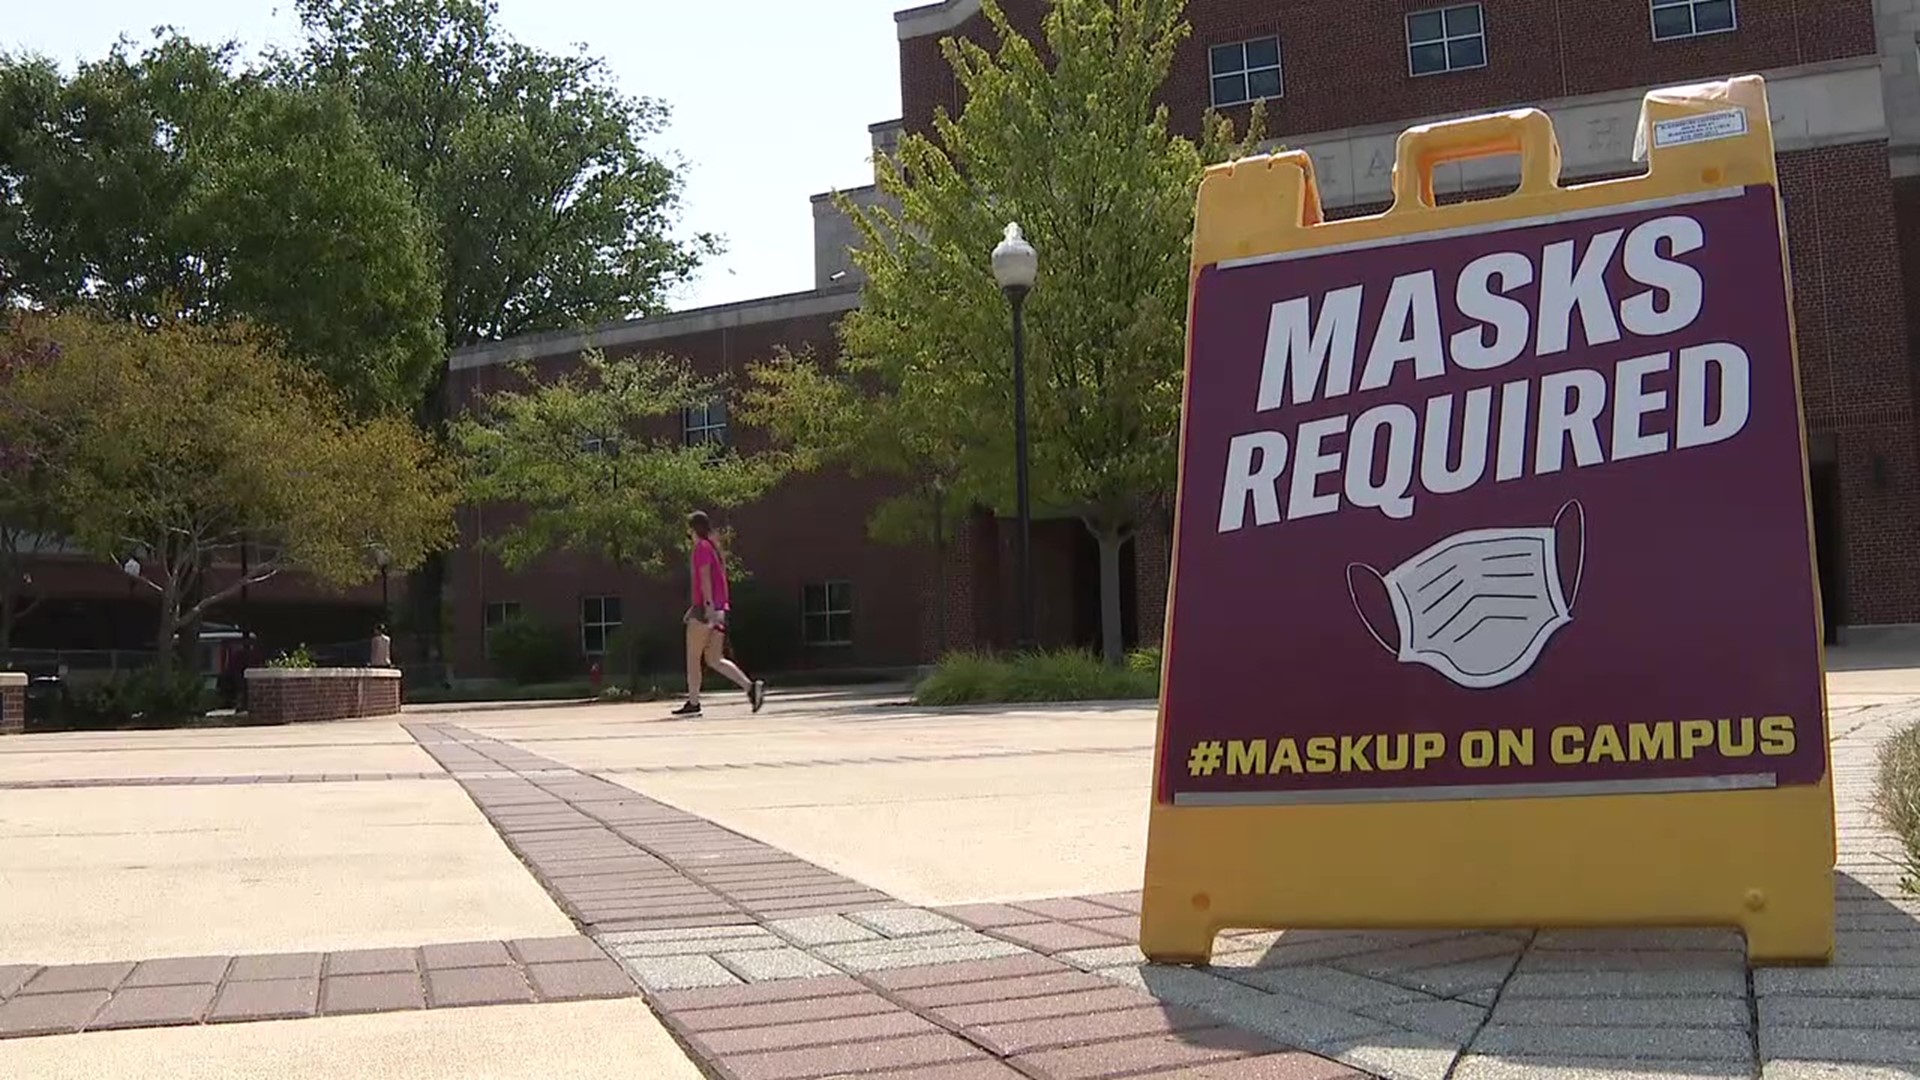 Some students and faculty at Bloomsburg University are worried that the increase in positive tests means they will have to go home before the end of the semester.